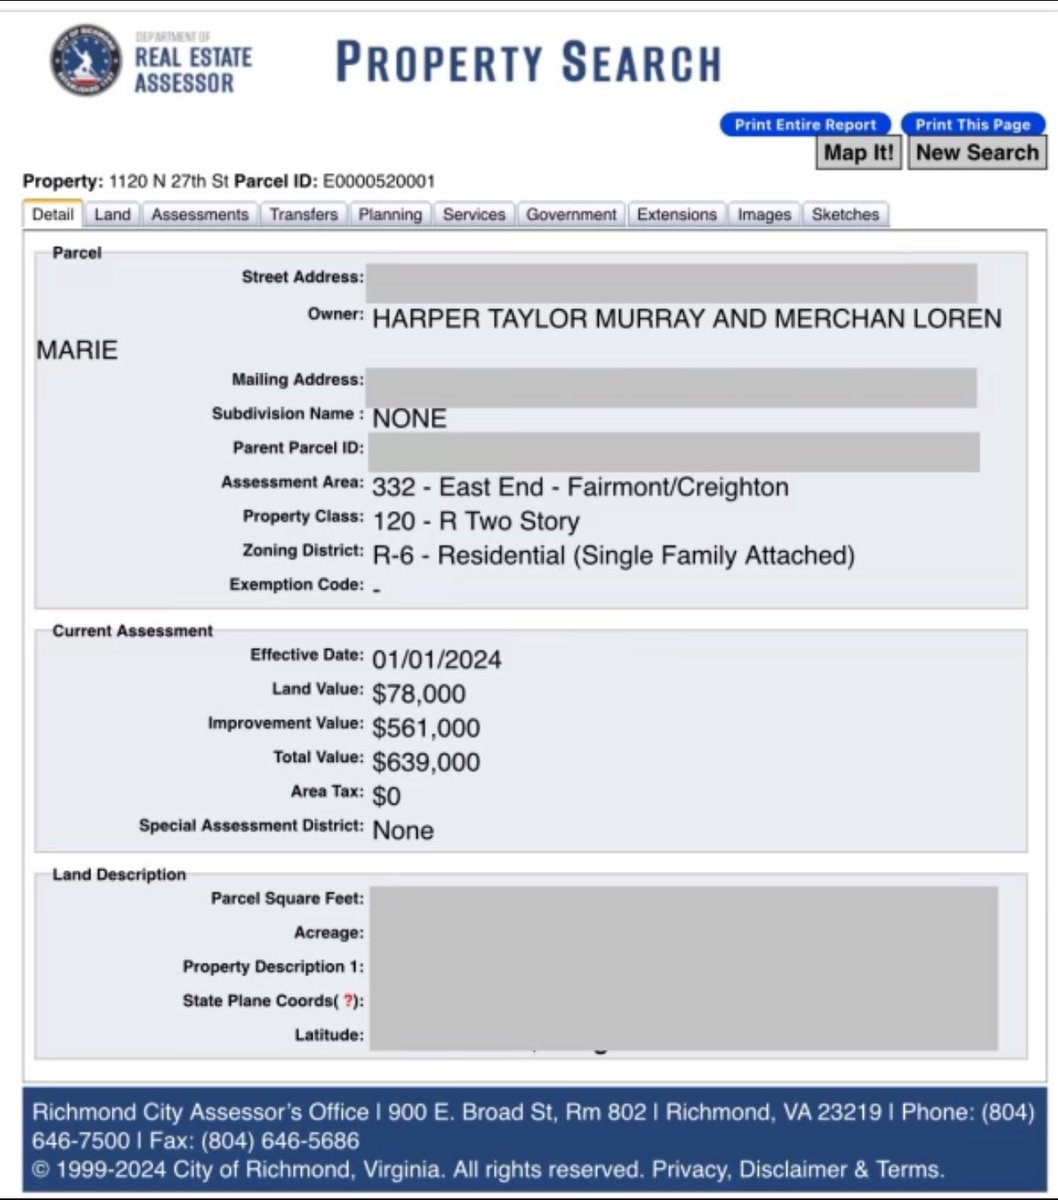 EXCLUSIVE EXPOSE: 🚨🚨🚨NEW JERSEY CONGRESSIONAL DEMOCRAT @RepSherrill @MikieSherrill MIKIE SHERRILL, WHO TOLD TRUMP TO “GO BACK TO COURT” HAS BEEN SENDING MONEY TO JUDGE MERCHAN’S DAUGHTER’S PERSONAL HOME RESIDENCE IN RICHMOND, VIRGINIA! 🚨🚨🚨 I was searching through